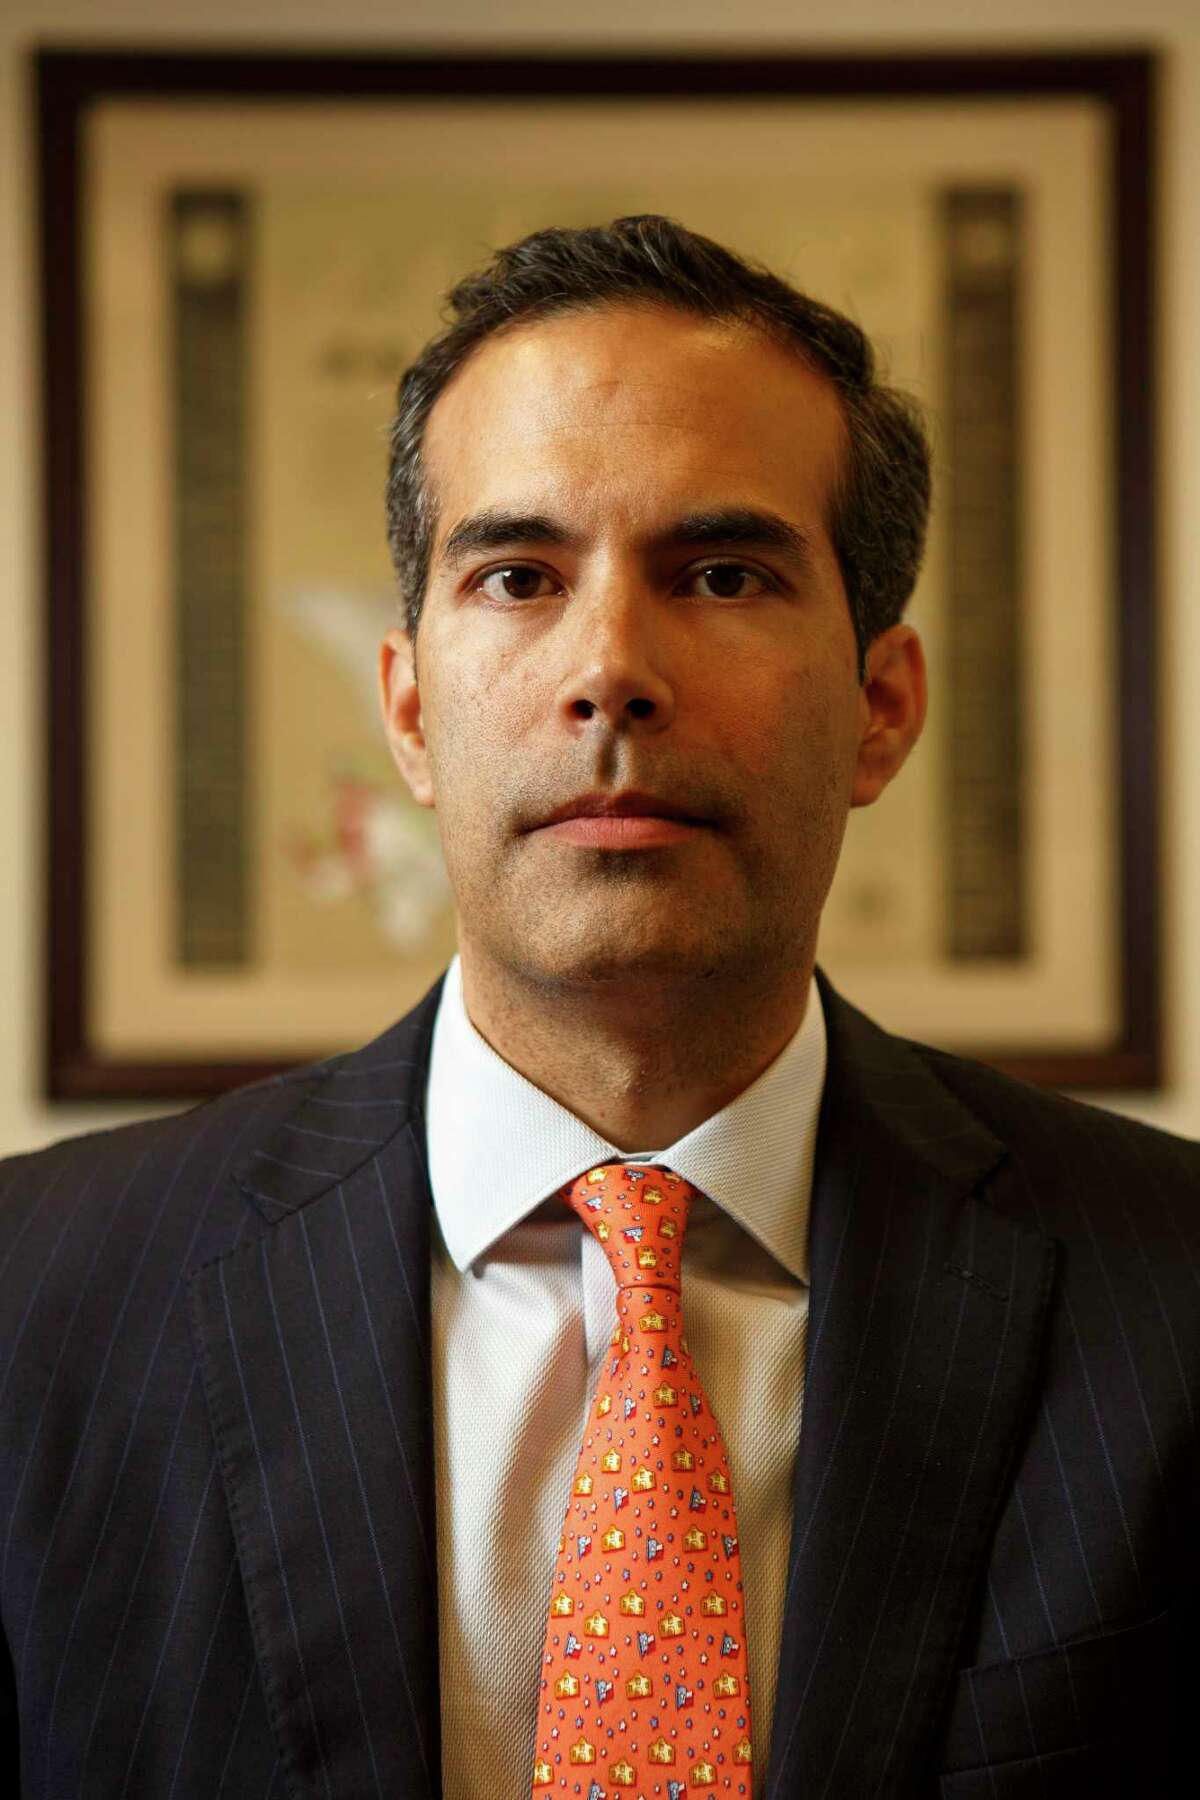 Texas Land Commisioner, George P. Bush, posing for a portrait in his office in Austin at 1700 Congress Ave. on Jan. 27, 2017.